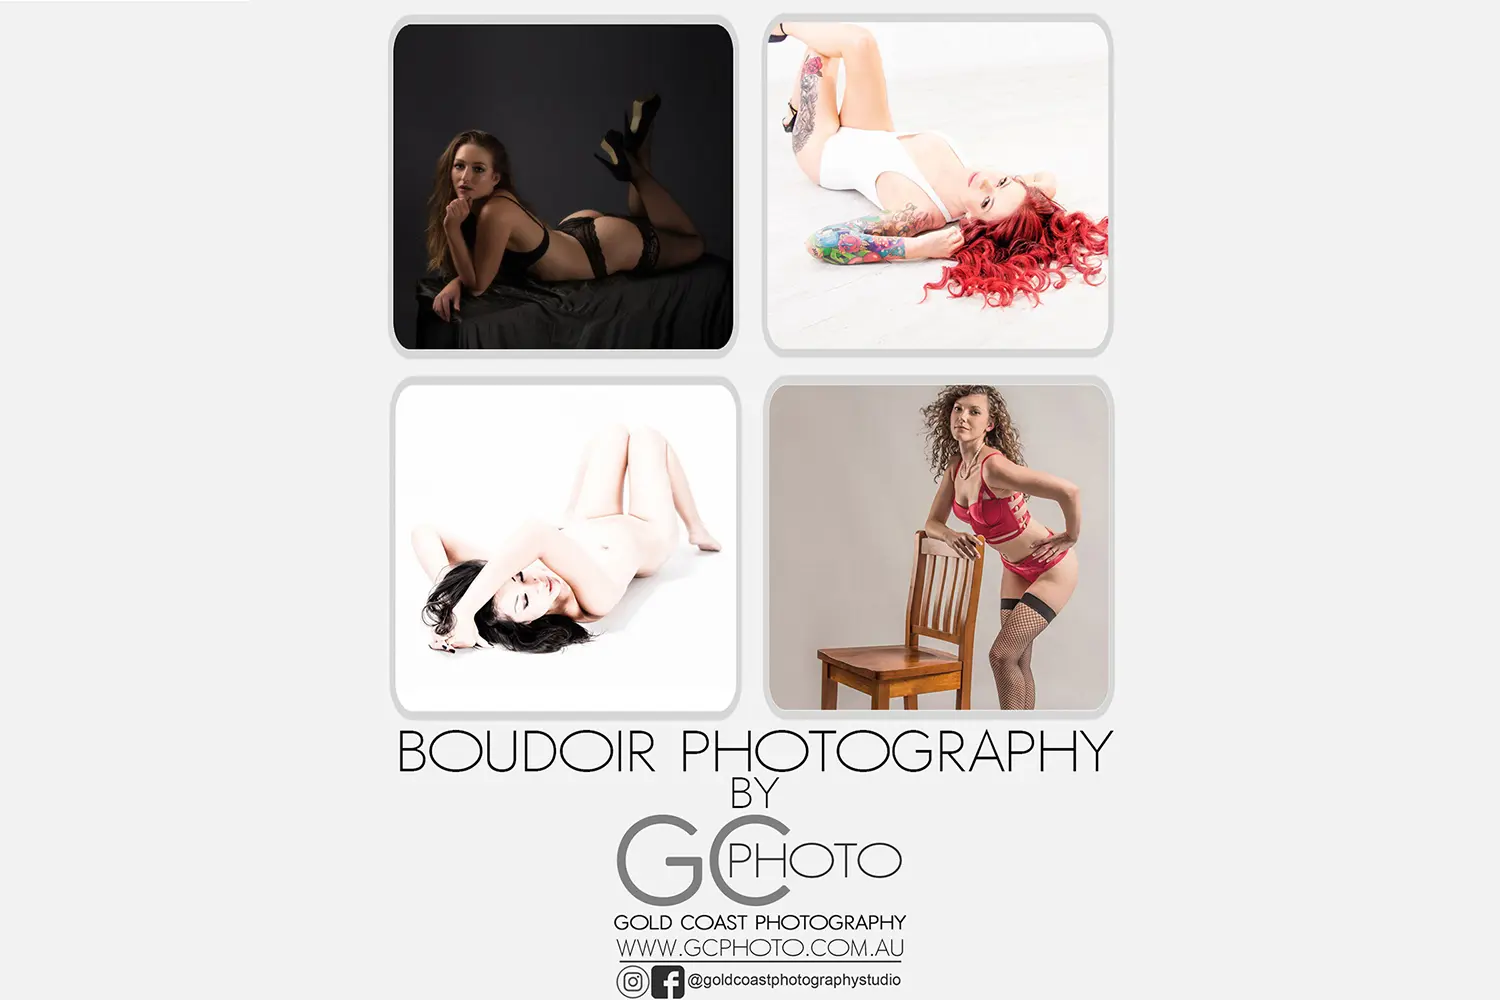 Boudoir Photography Packages from GCPhoto Gold Coast Photography in Tugun